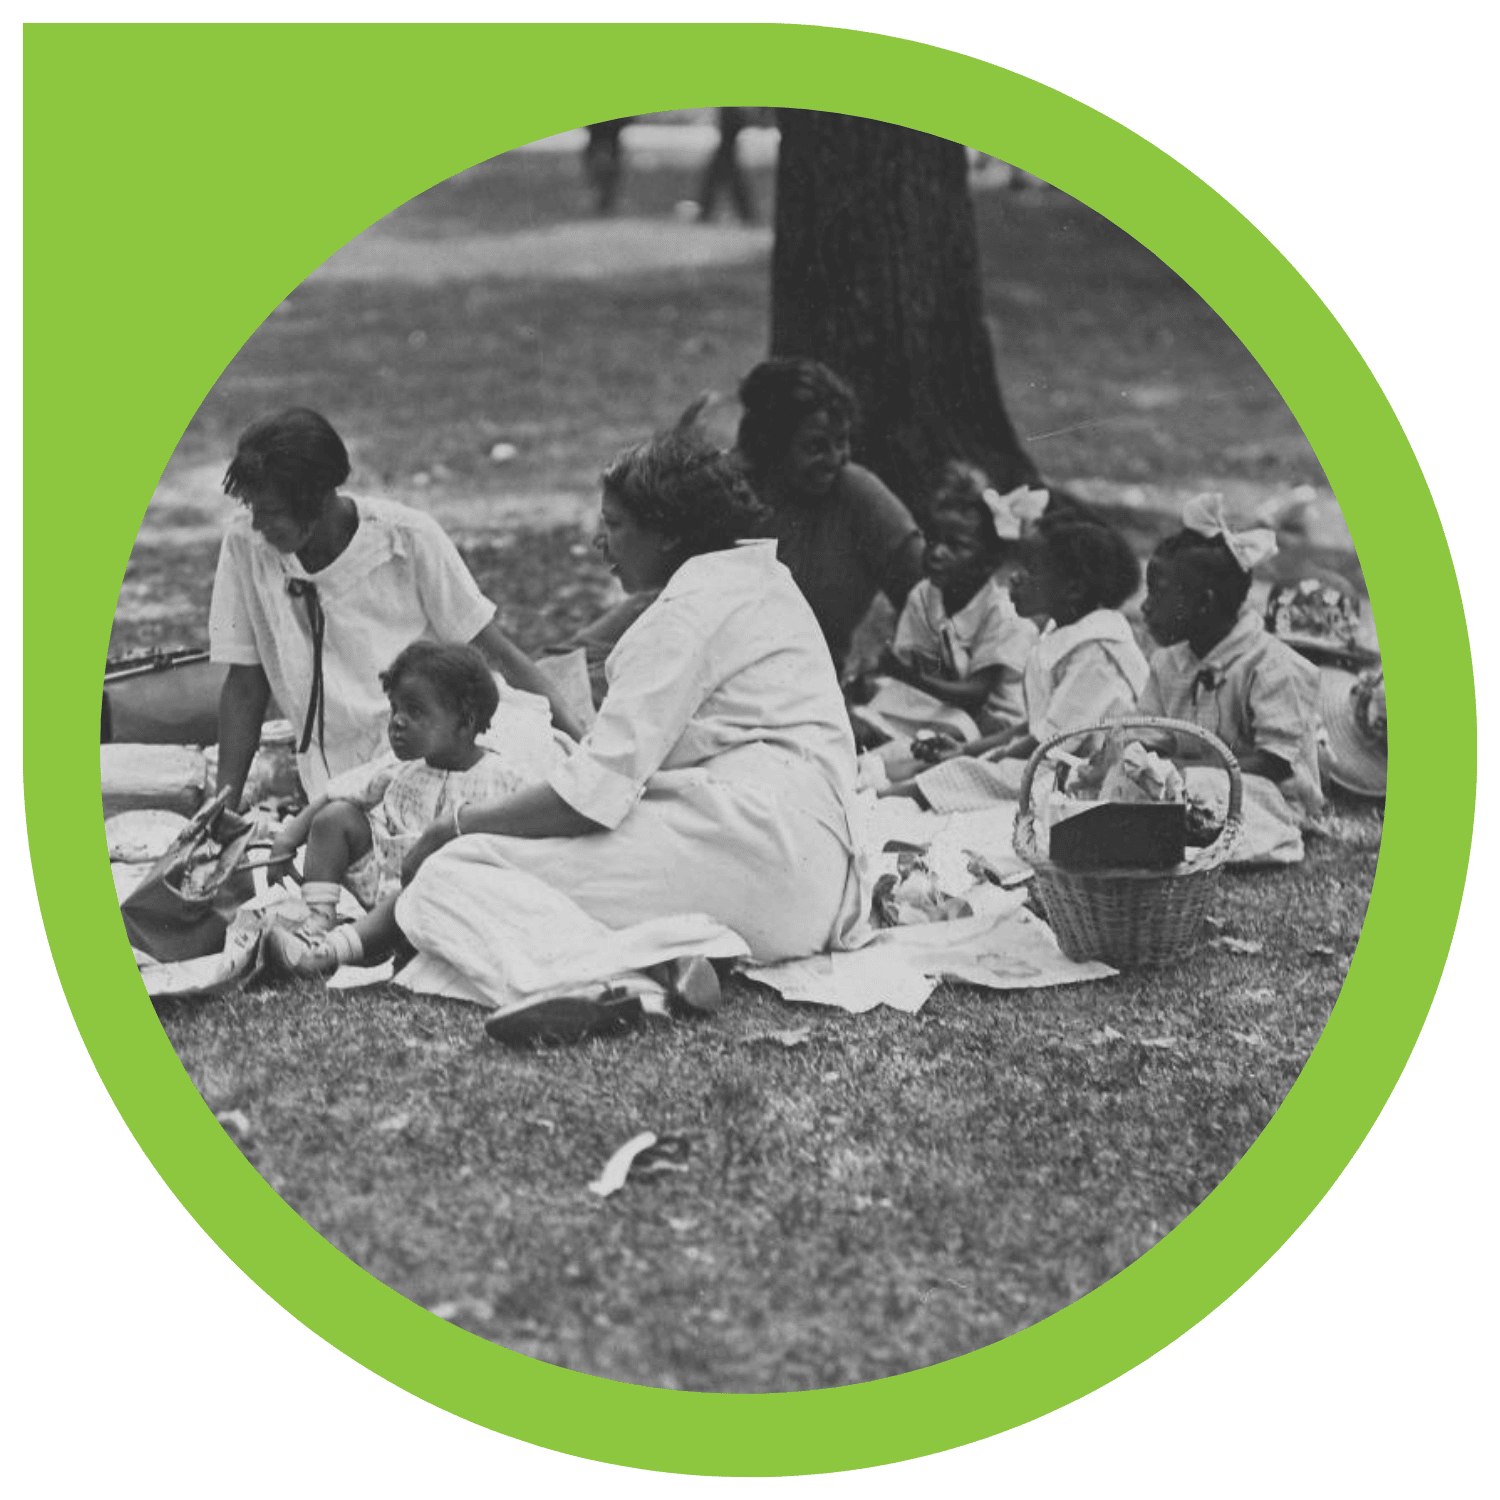 a black & white image of Black people having a park picnic, outlined in a round green bubble